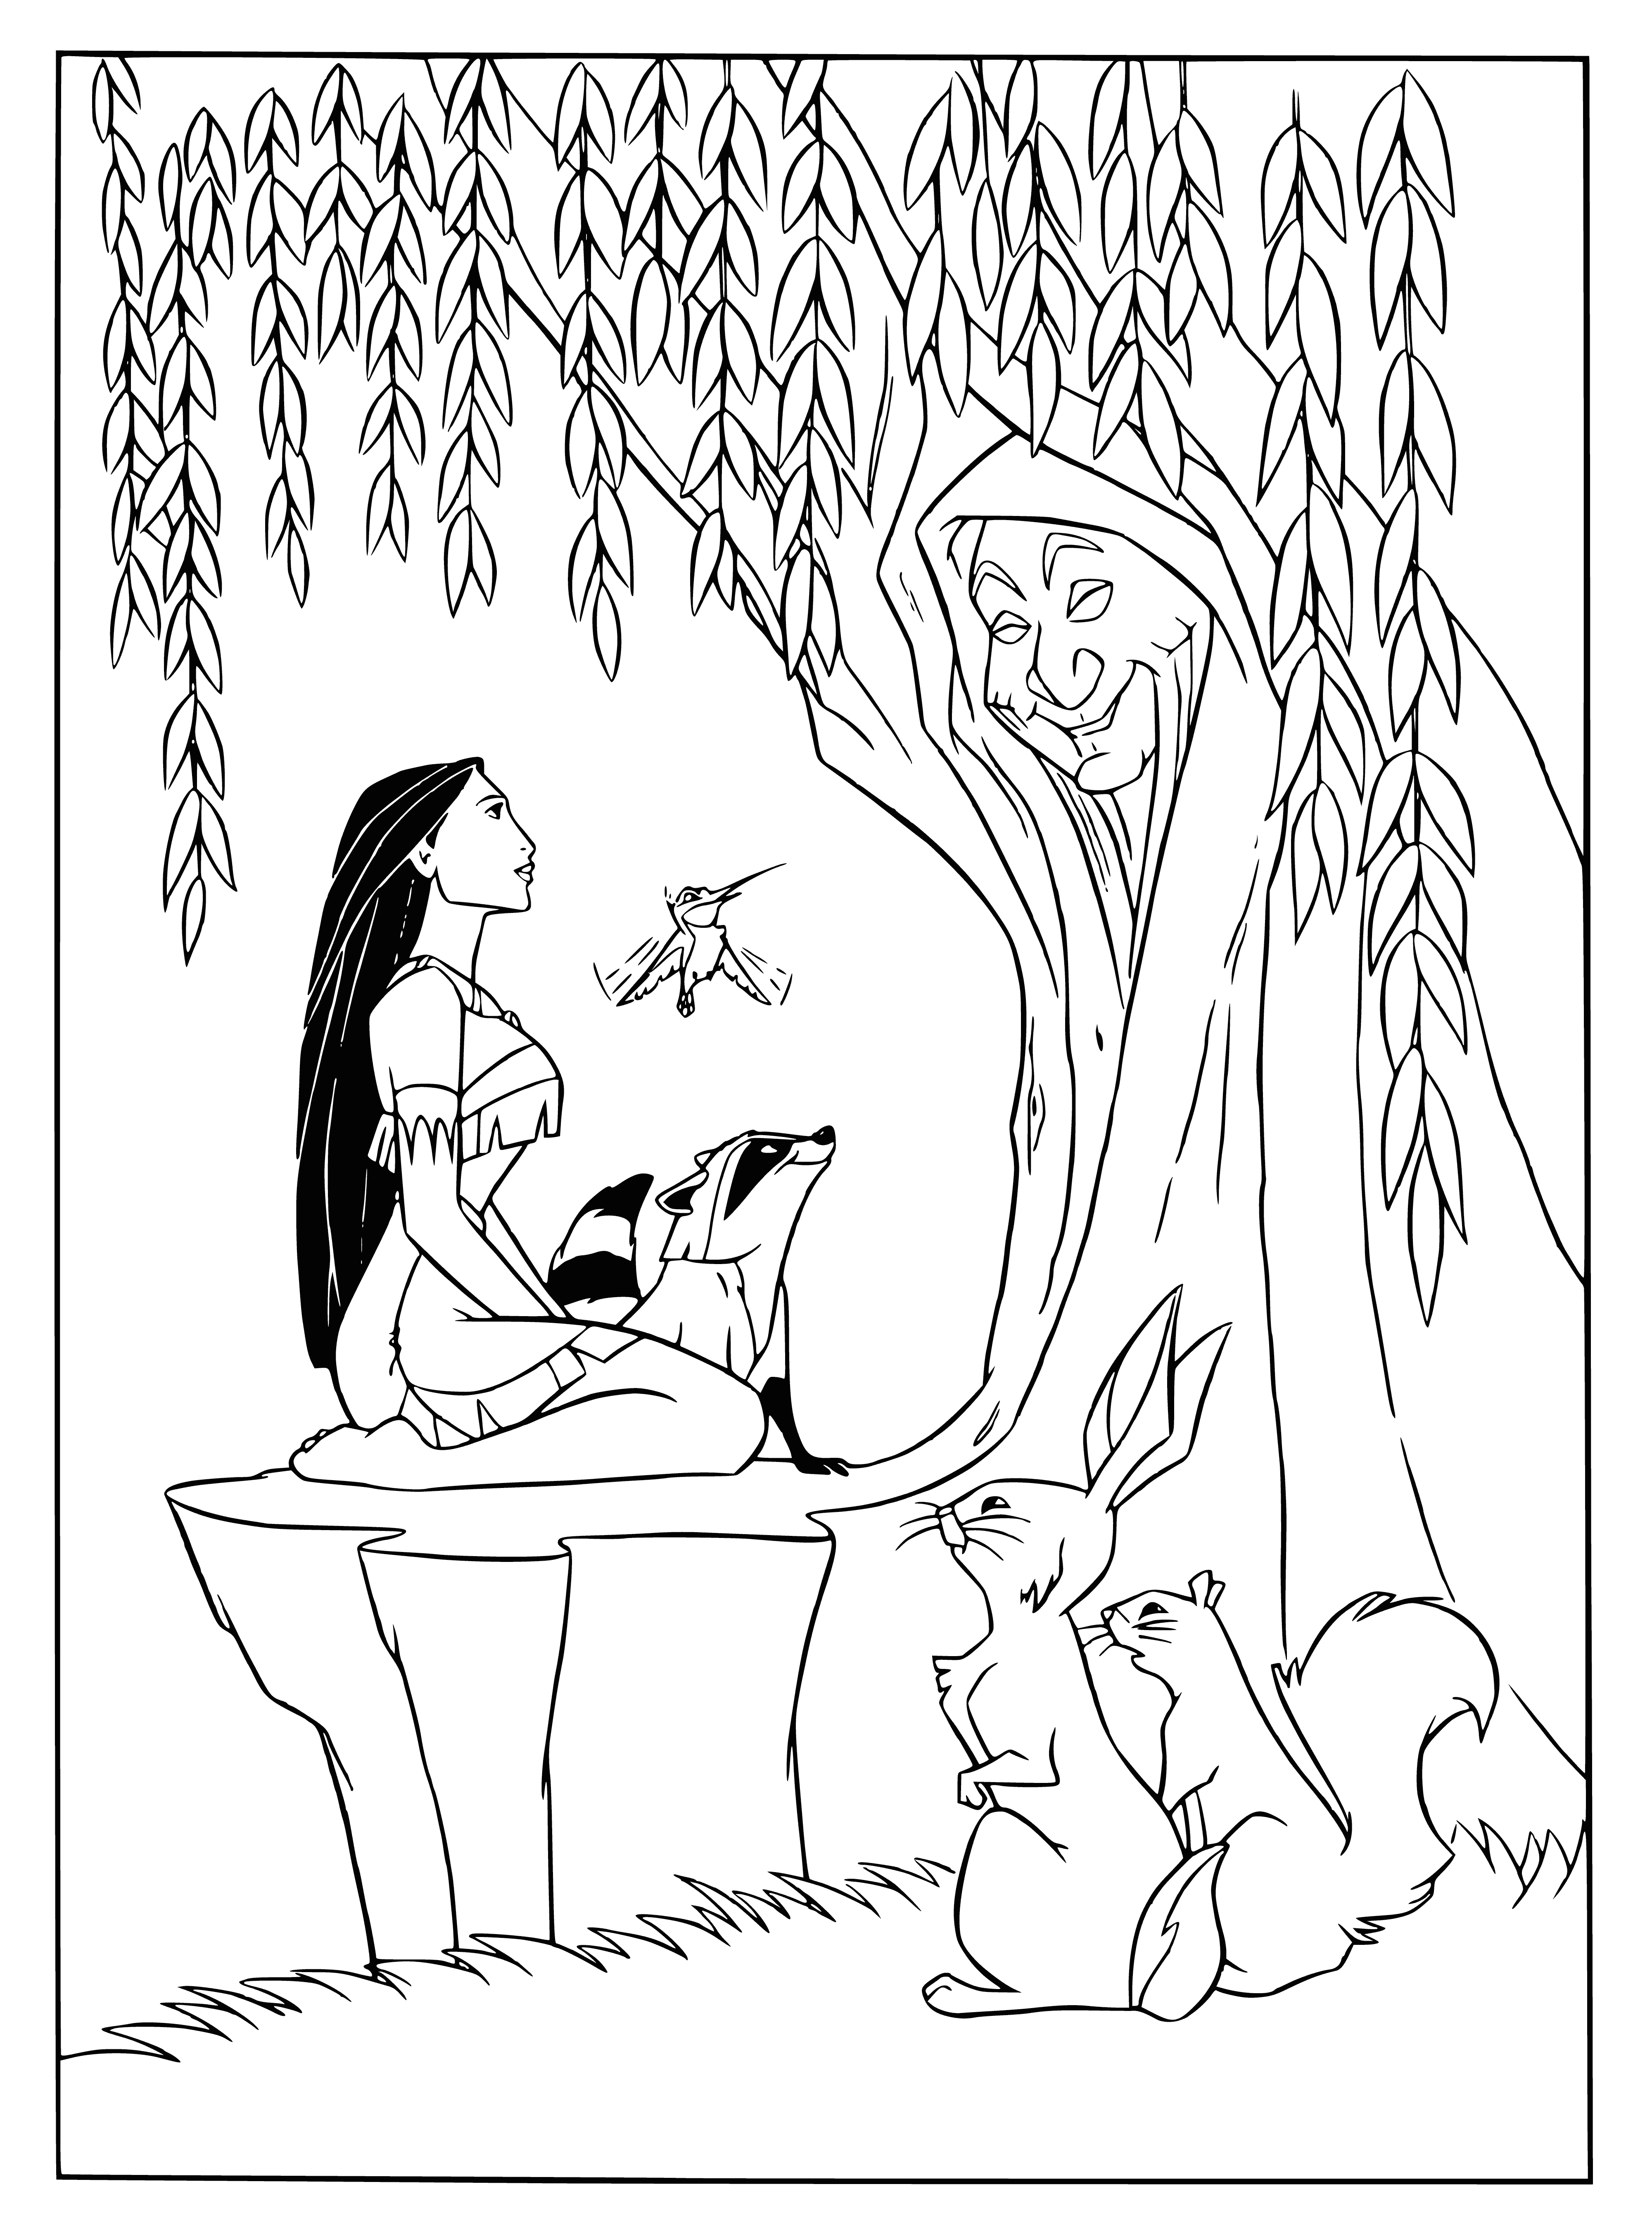 coloring page: Pocahontas happily reunites with her grandmother and chats happily.